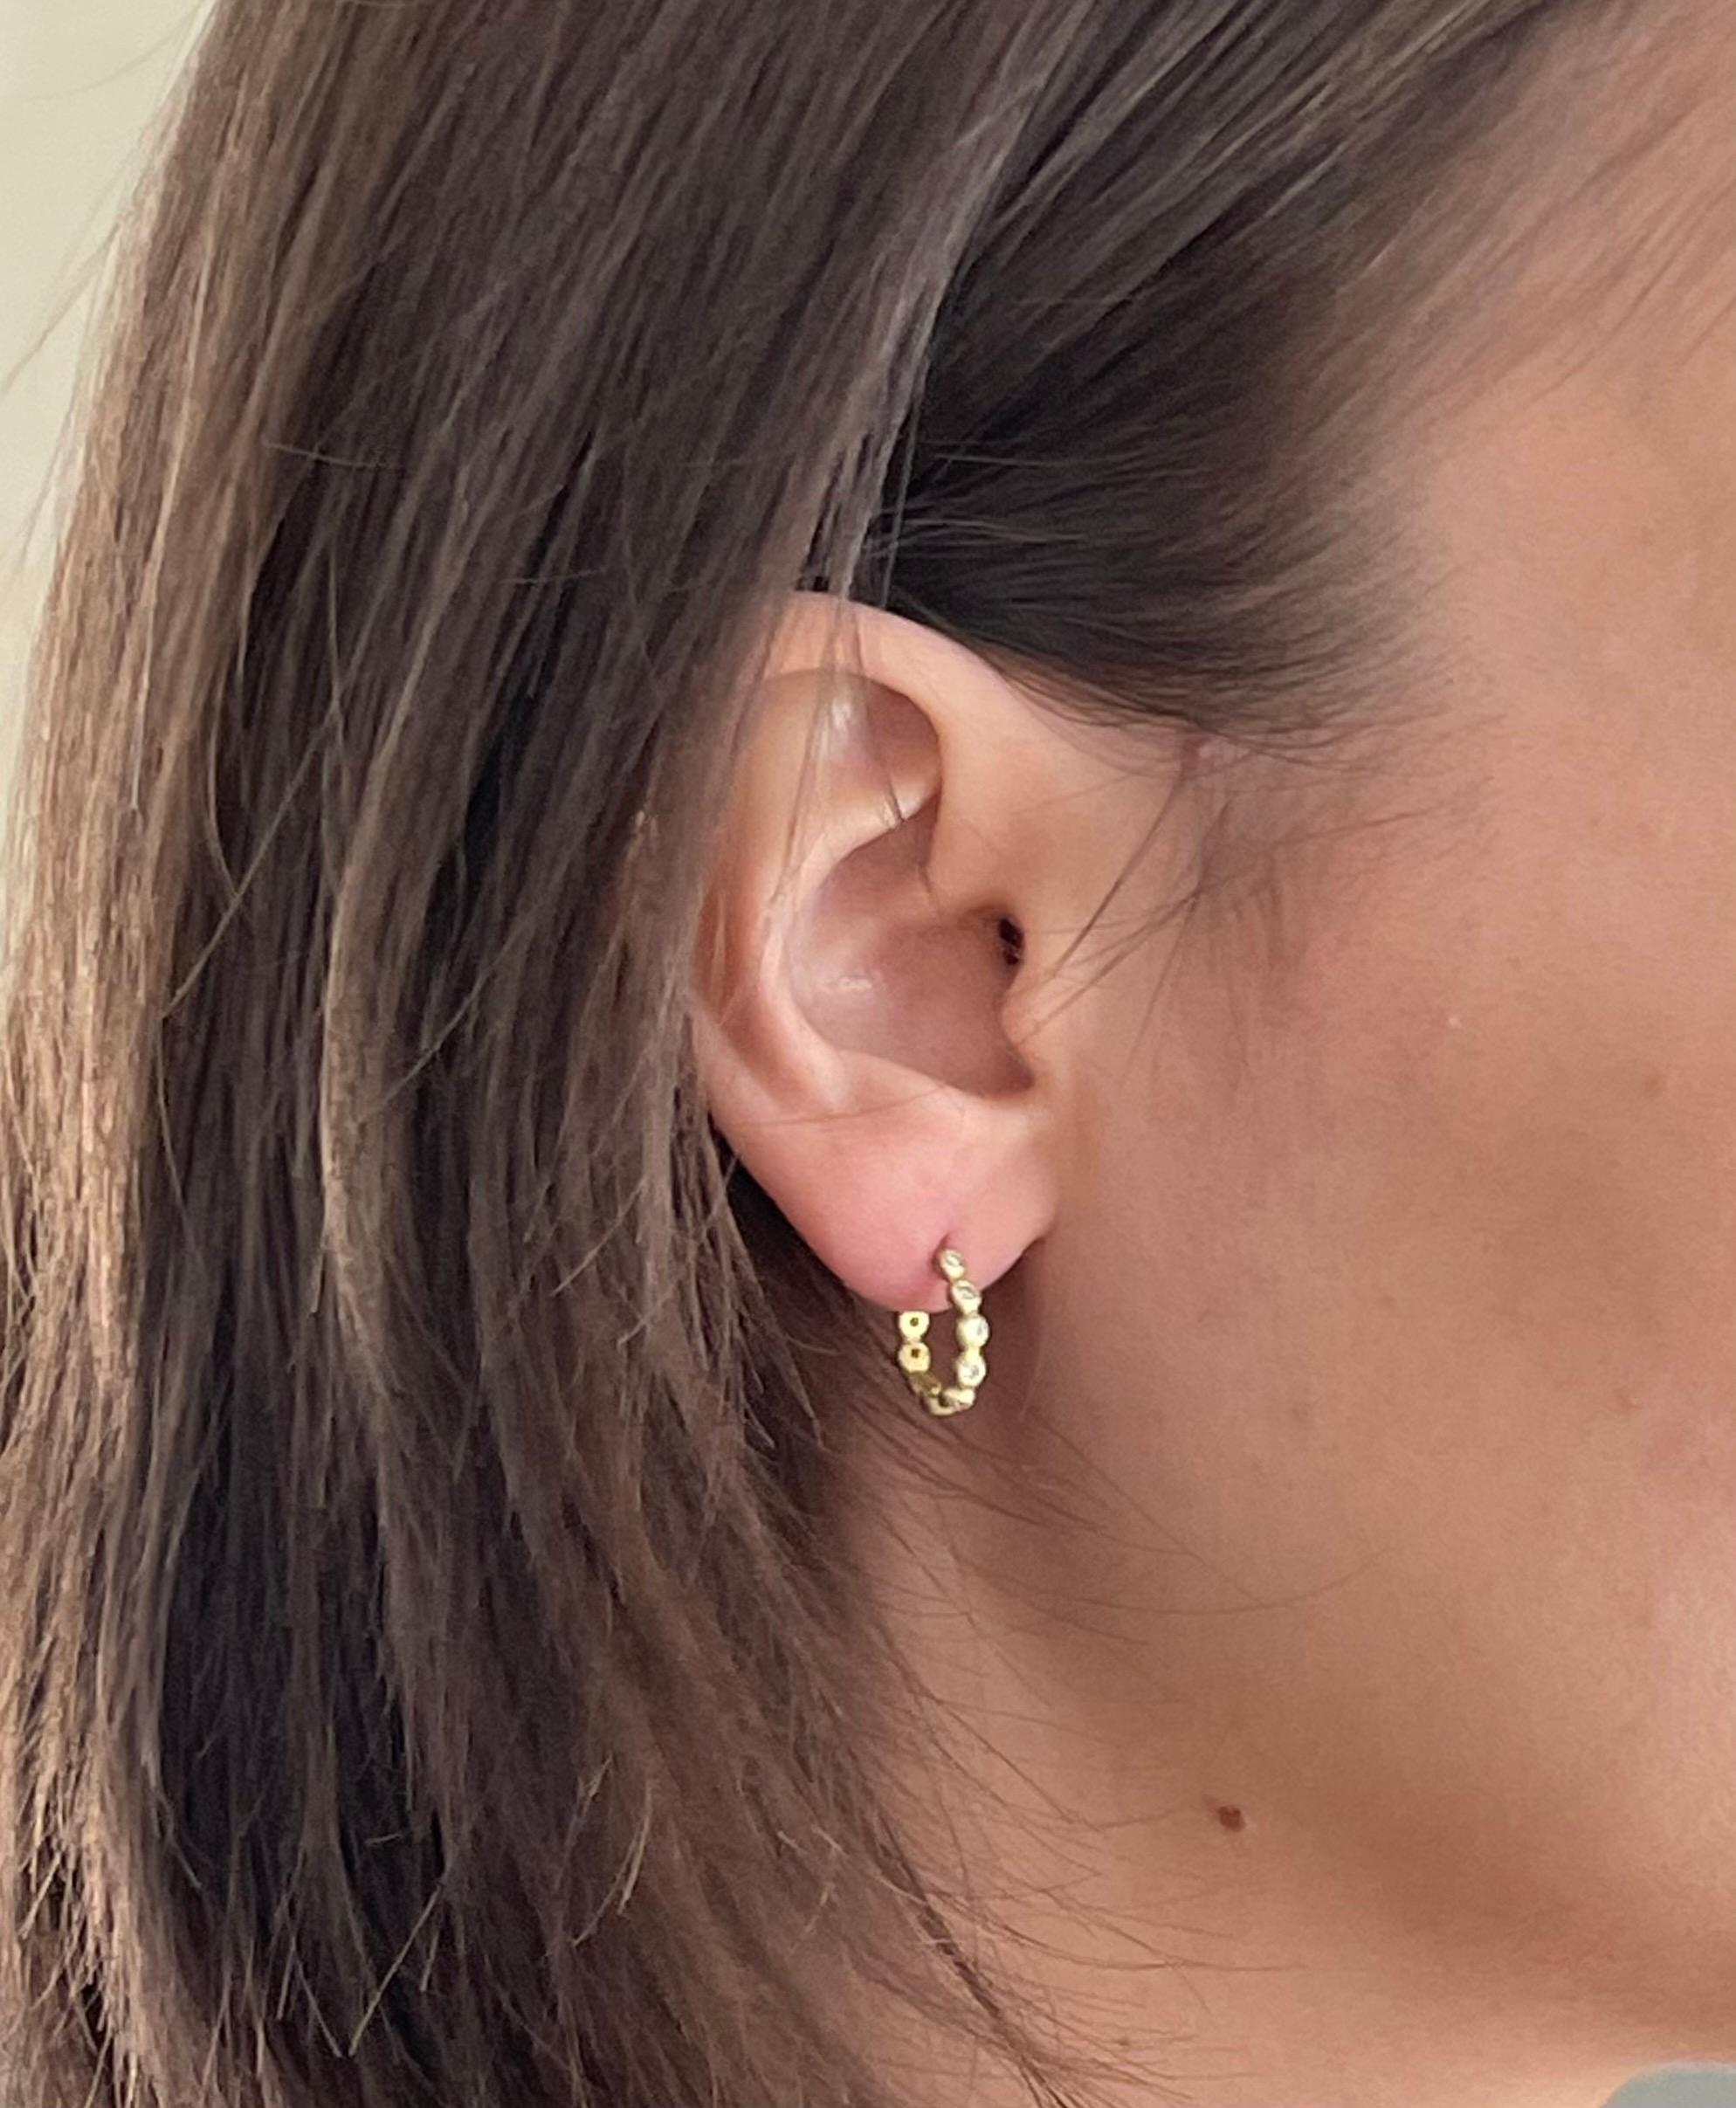 Handcrafted in 18k gold*, Faye Kim’s modern granulation hoop design is a go to everyday look! The signature matte finish enhances the bright sparkle of the diamonds and conveys understated elegance. 

Diamonds = .27 cts twt
3/8